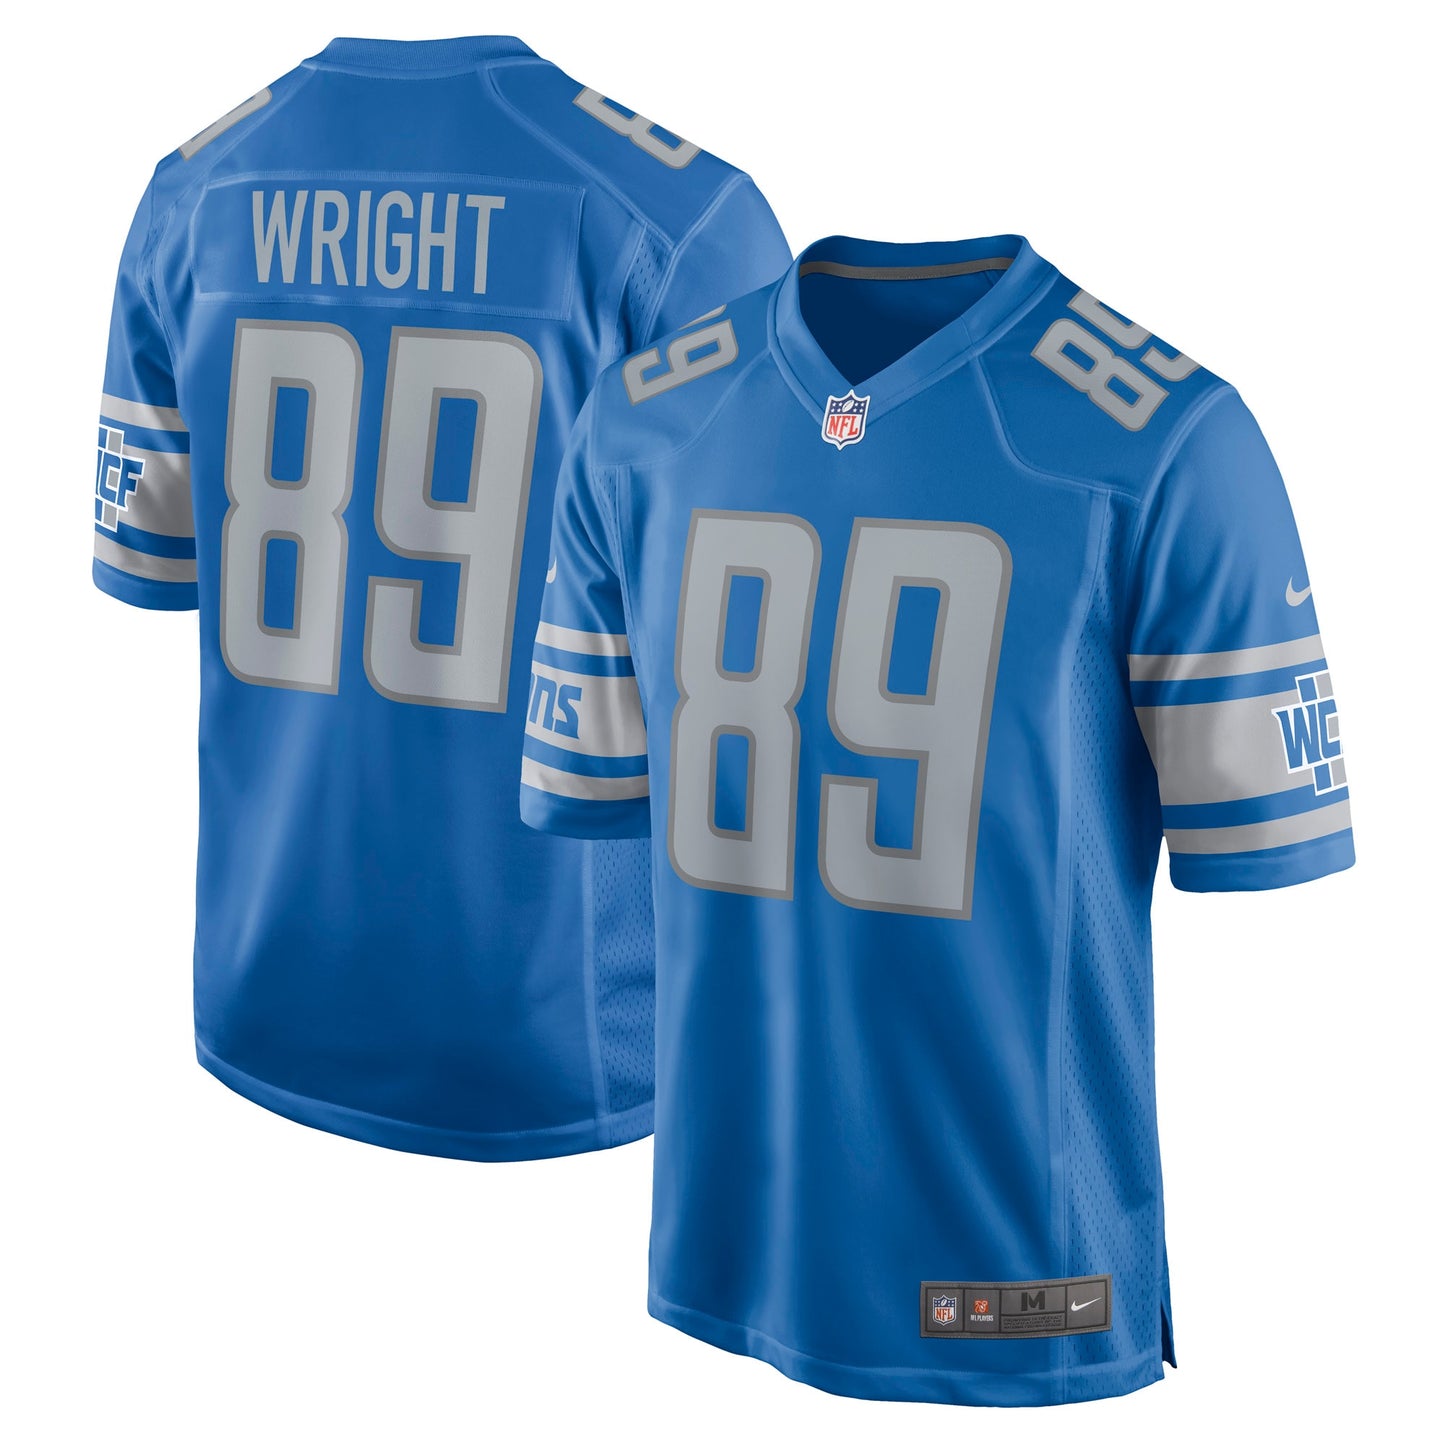 Brock Wright Detroit Lions Nike Game Jersey - Blue